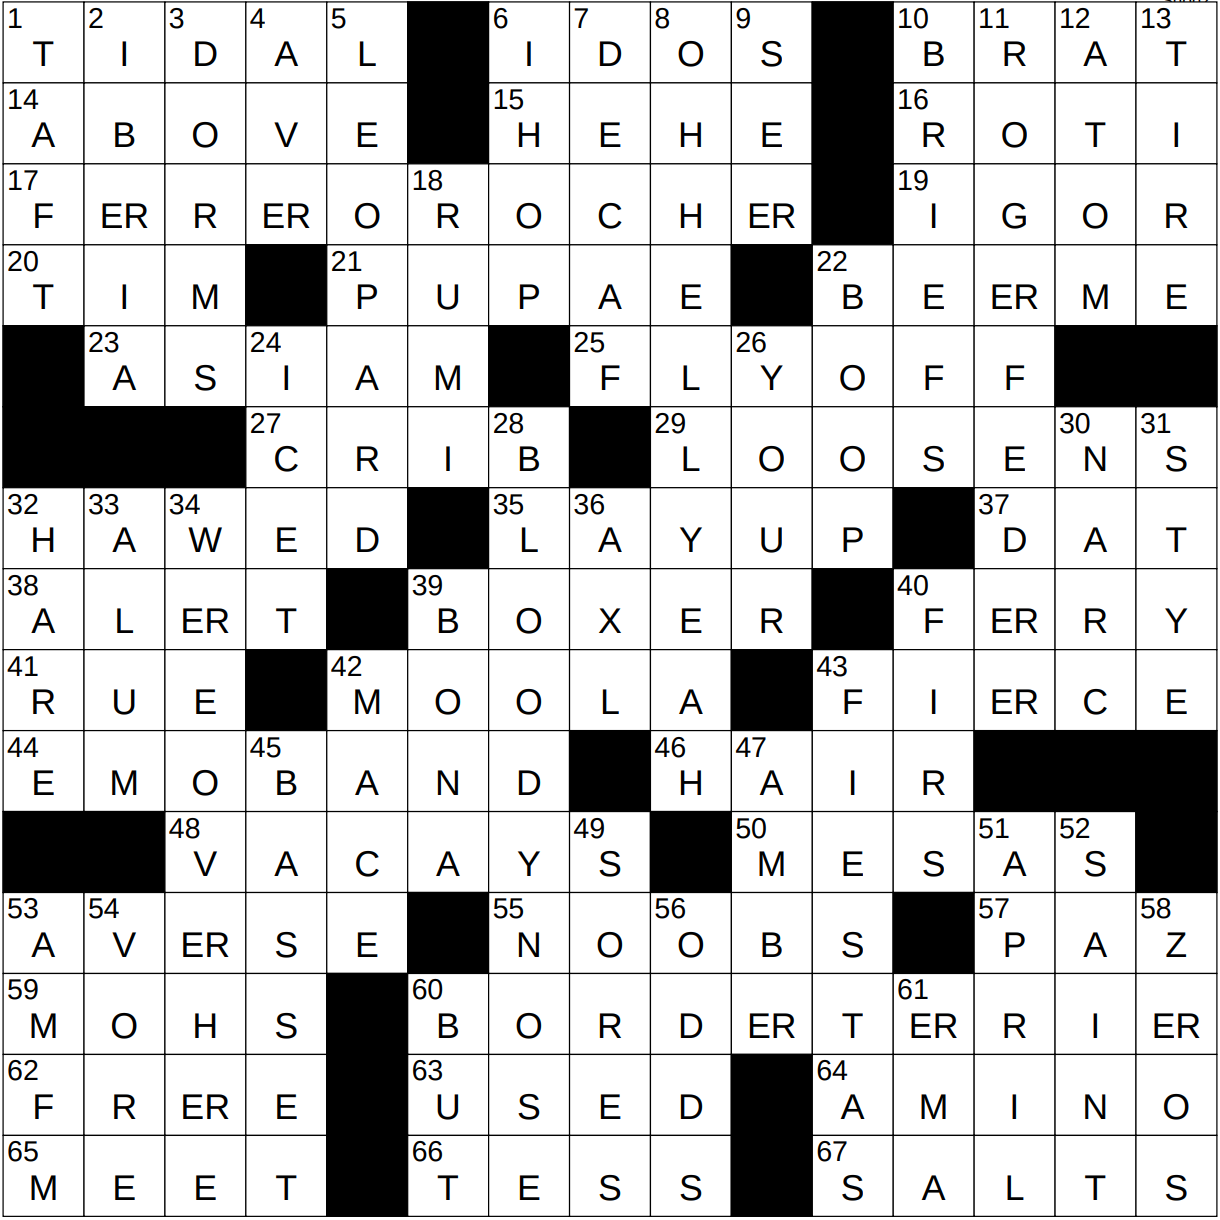 virtuously crossword clue